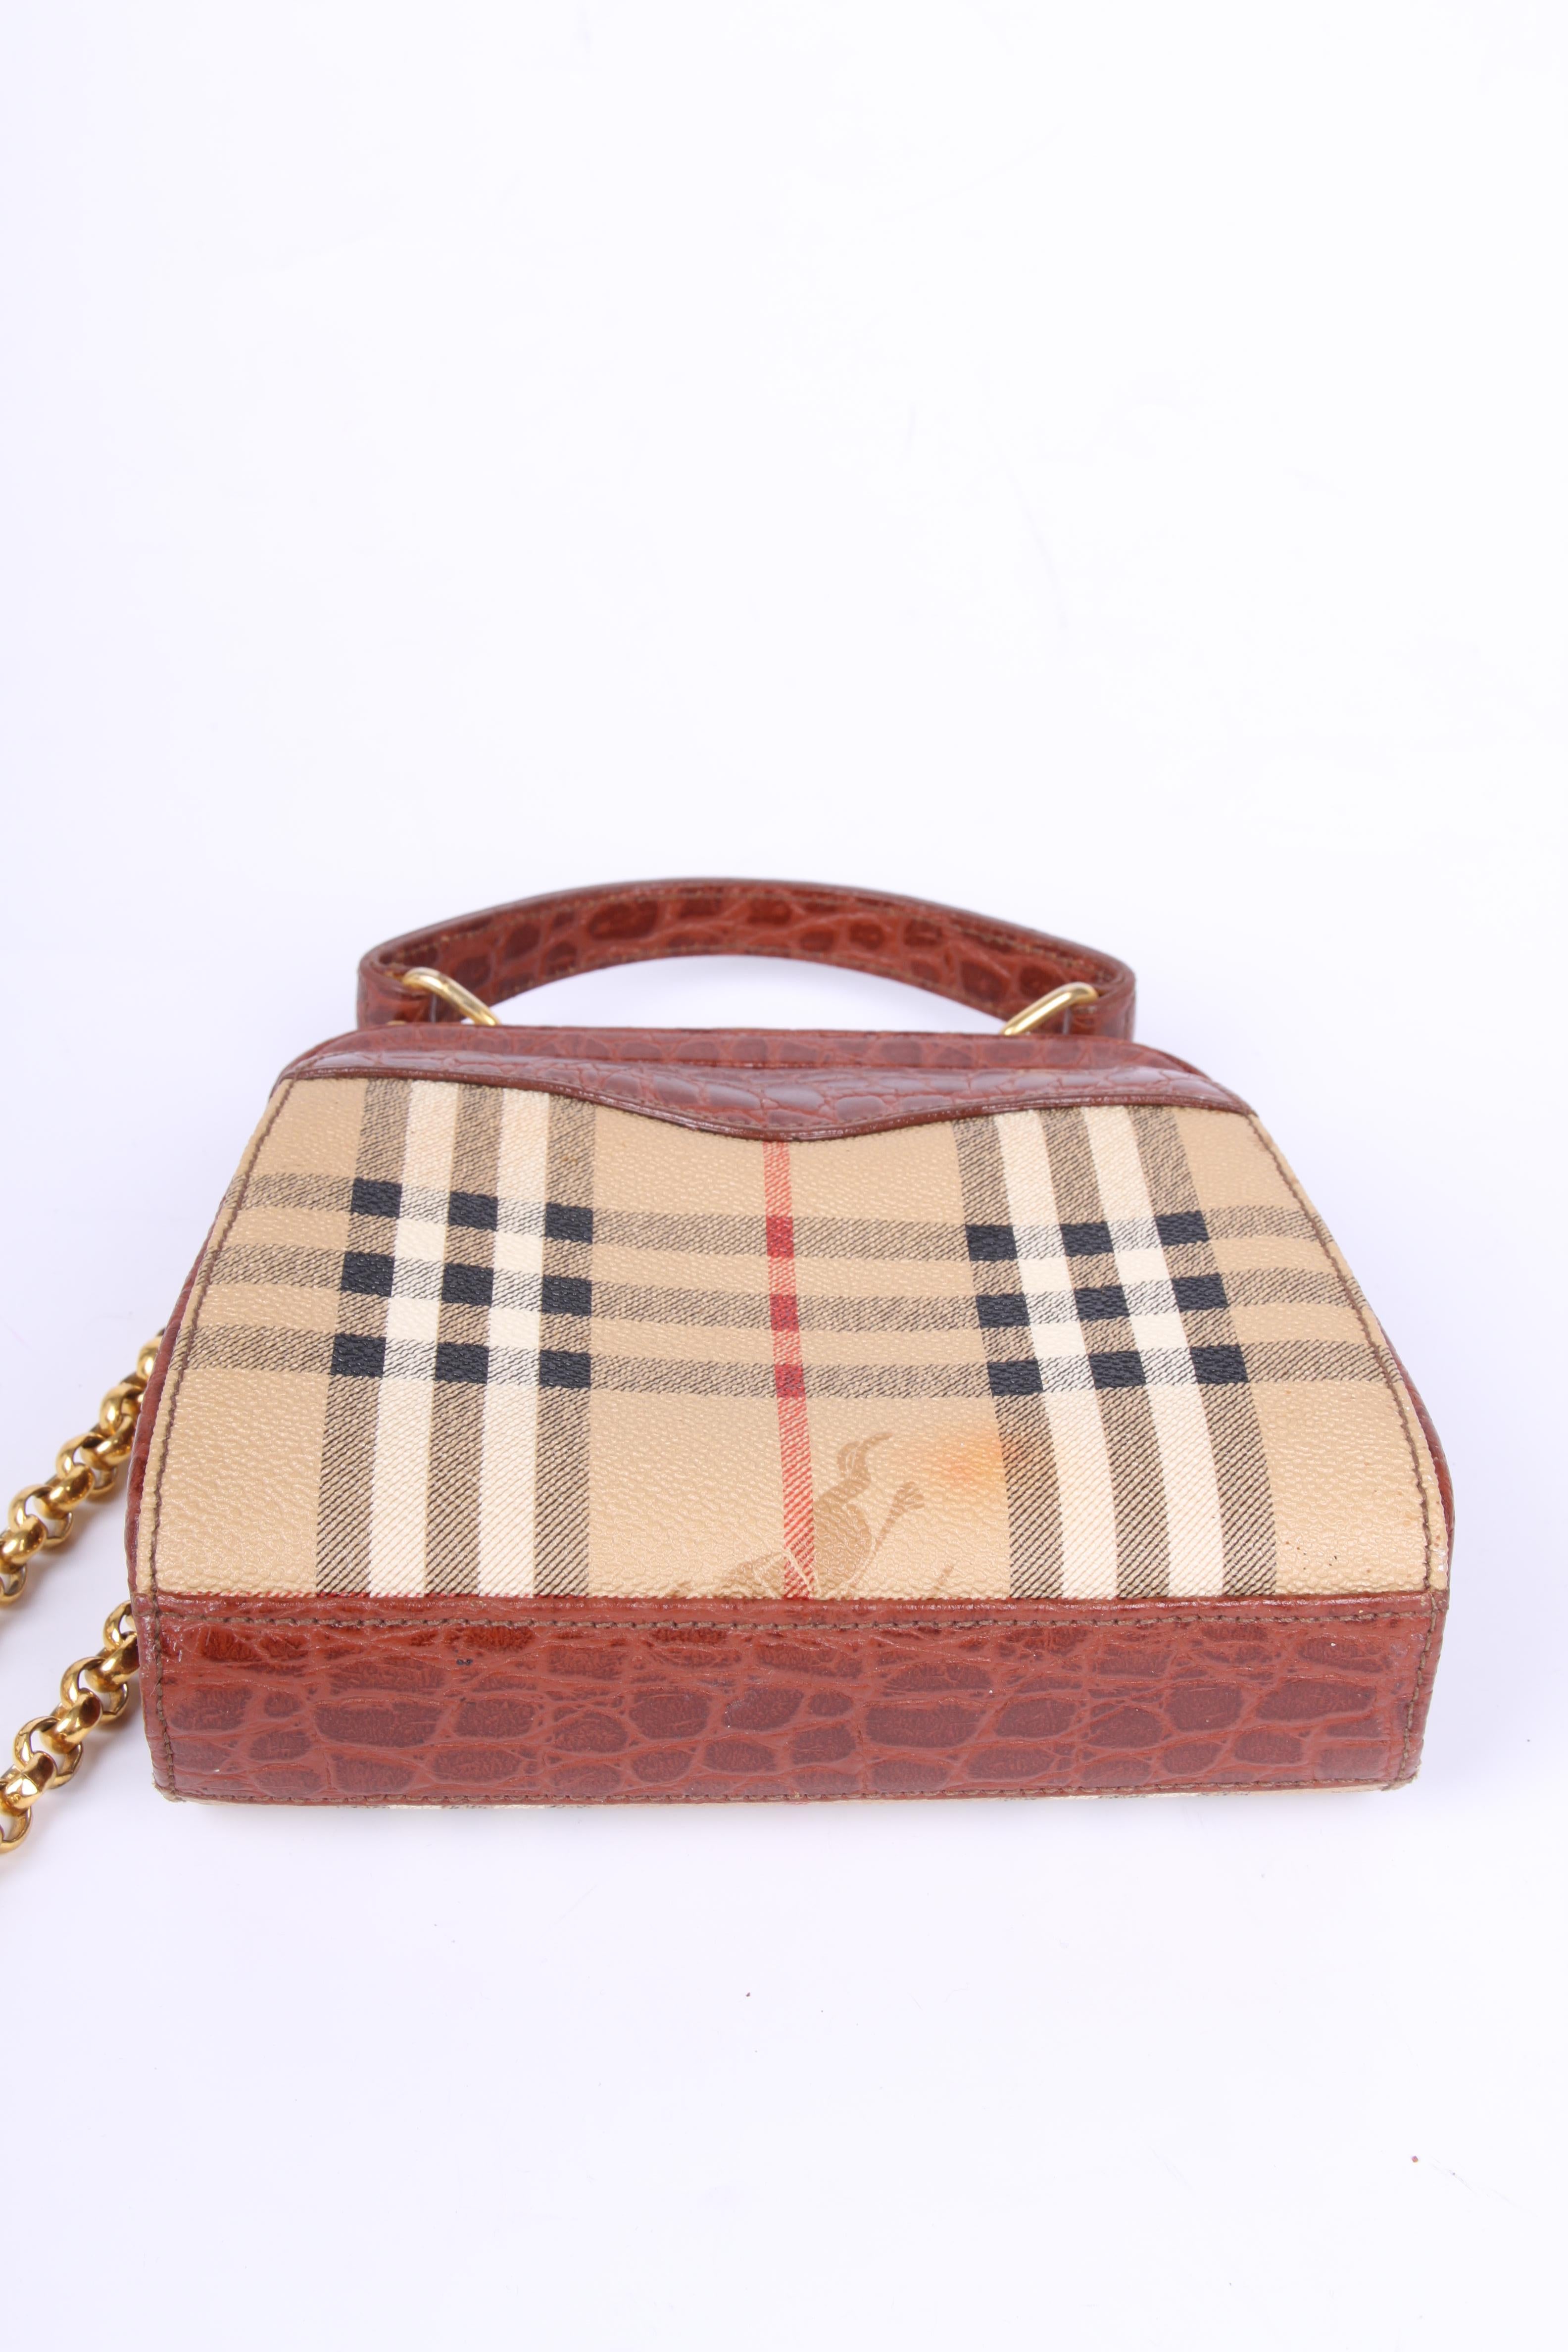 Vintage crossbody bag by Burberry. Adorable!

This little model is of course embellished with the famous Burberry checks in beige, black, white and red. Top closure with a gold-tone push lock, a Burberry plaque at the front. Garnished with brown